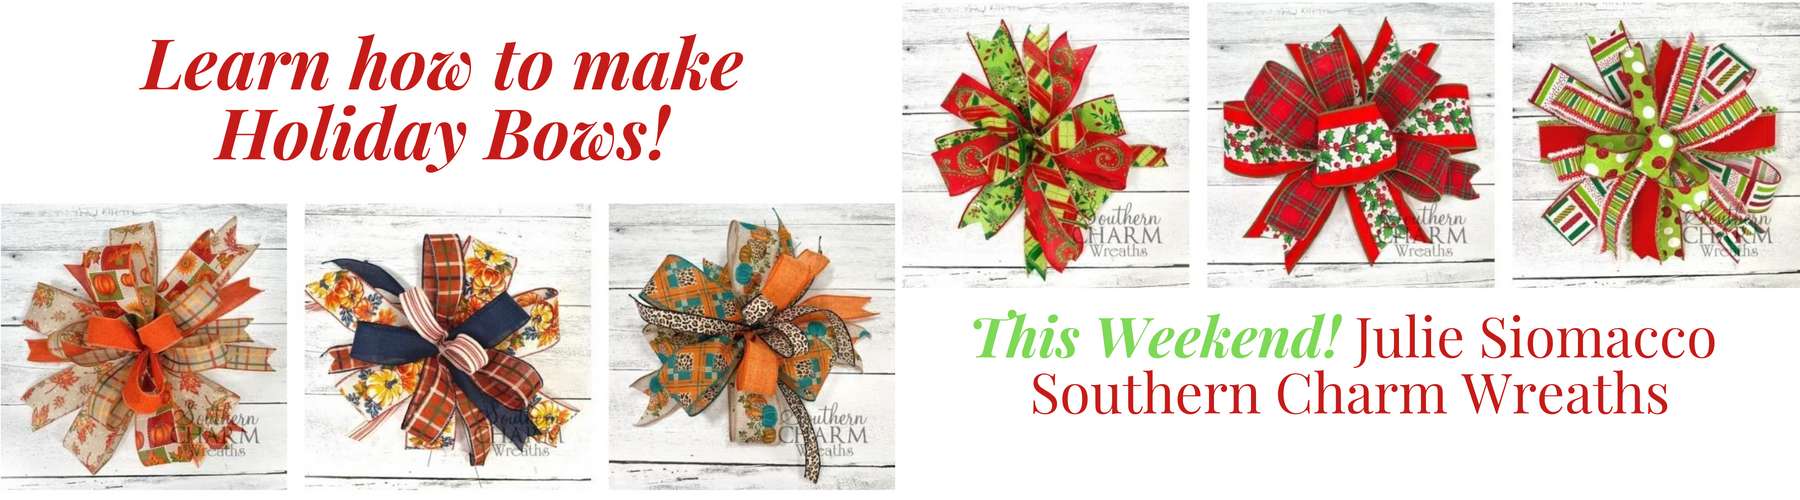 learn how to make bows with southern charm wreaths